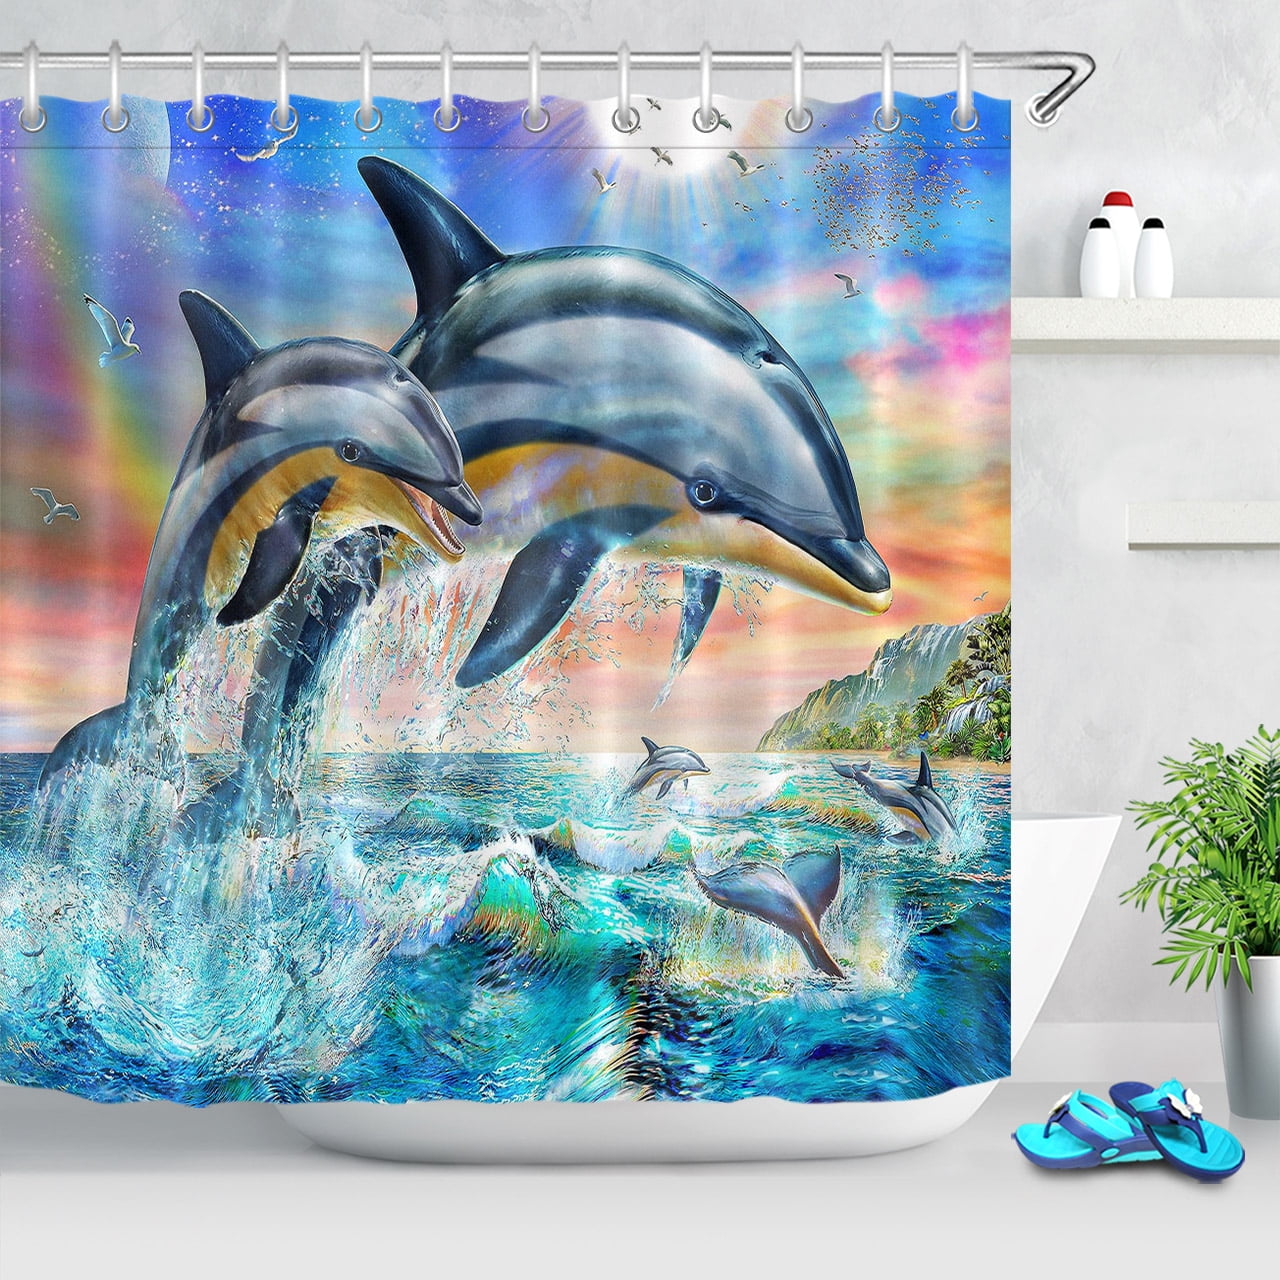 180x180cm Dolphin on the Sea Shower Curtain Waterproof Anti Mould ...